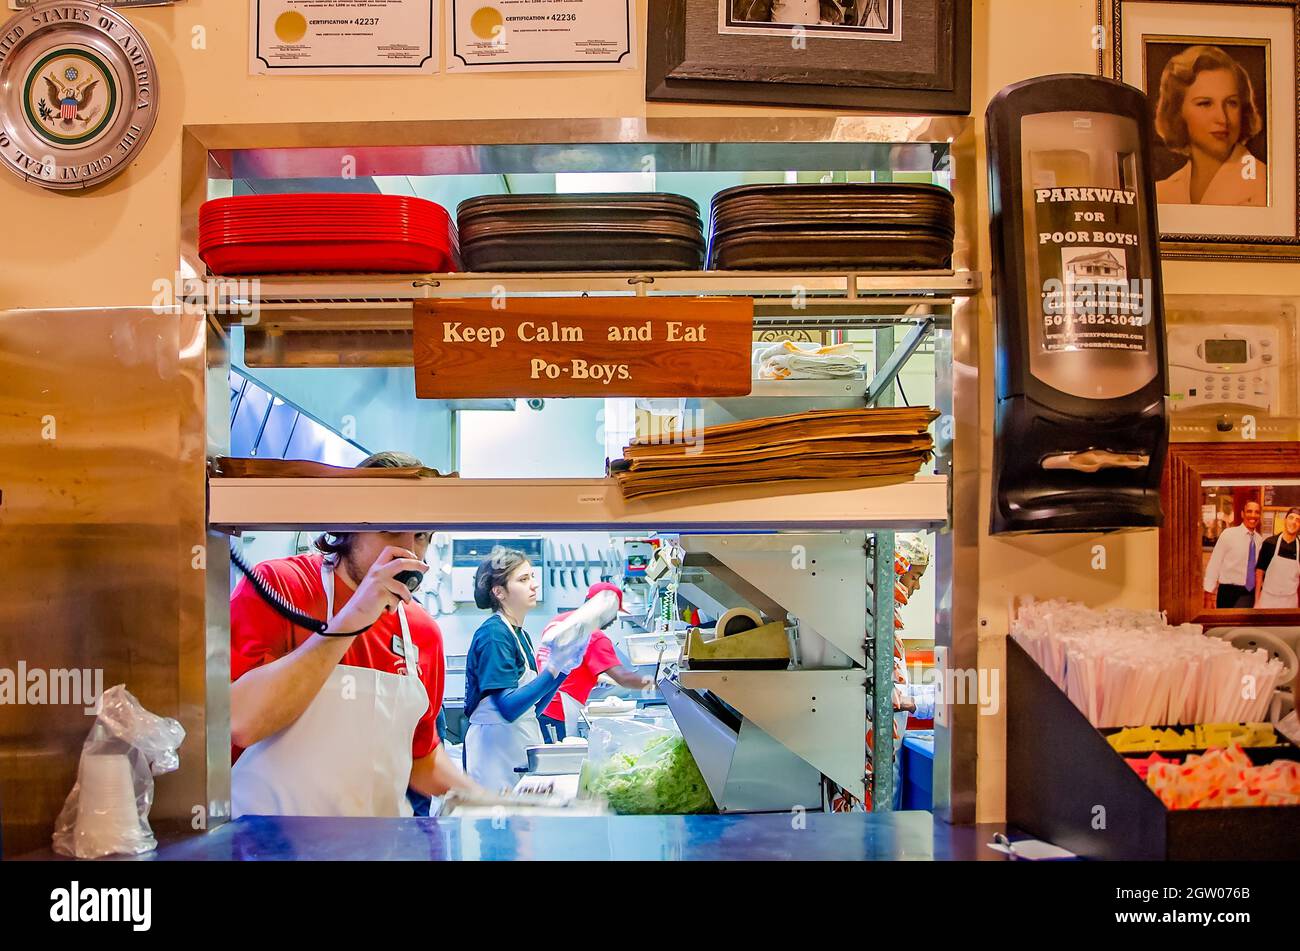 The pick-up window at Parkway Tavern & Bakery features a sign encouraging customers to “Keep calm and eat po-boys,” Nov. 12, 2015, in New Orleans, La. Stock Photo